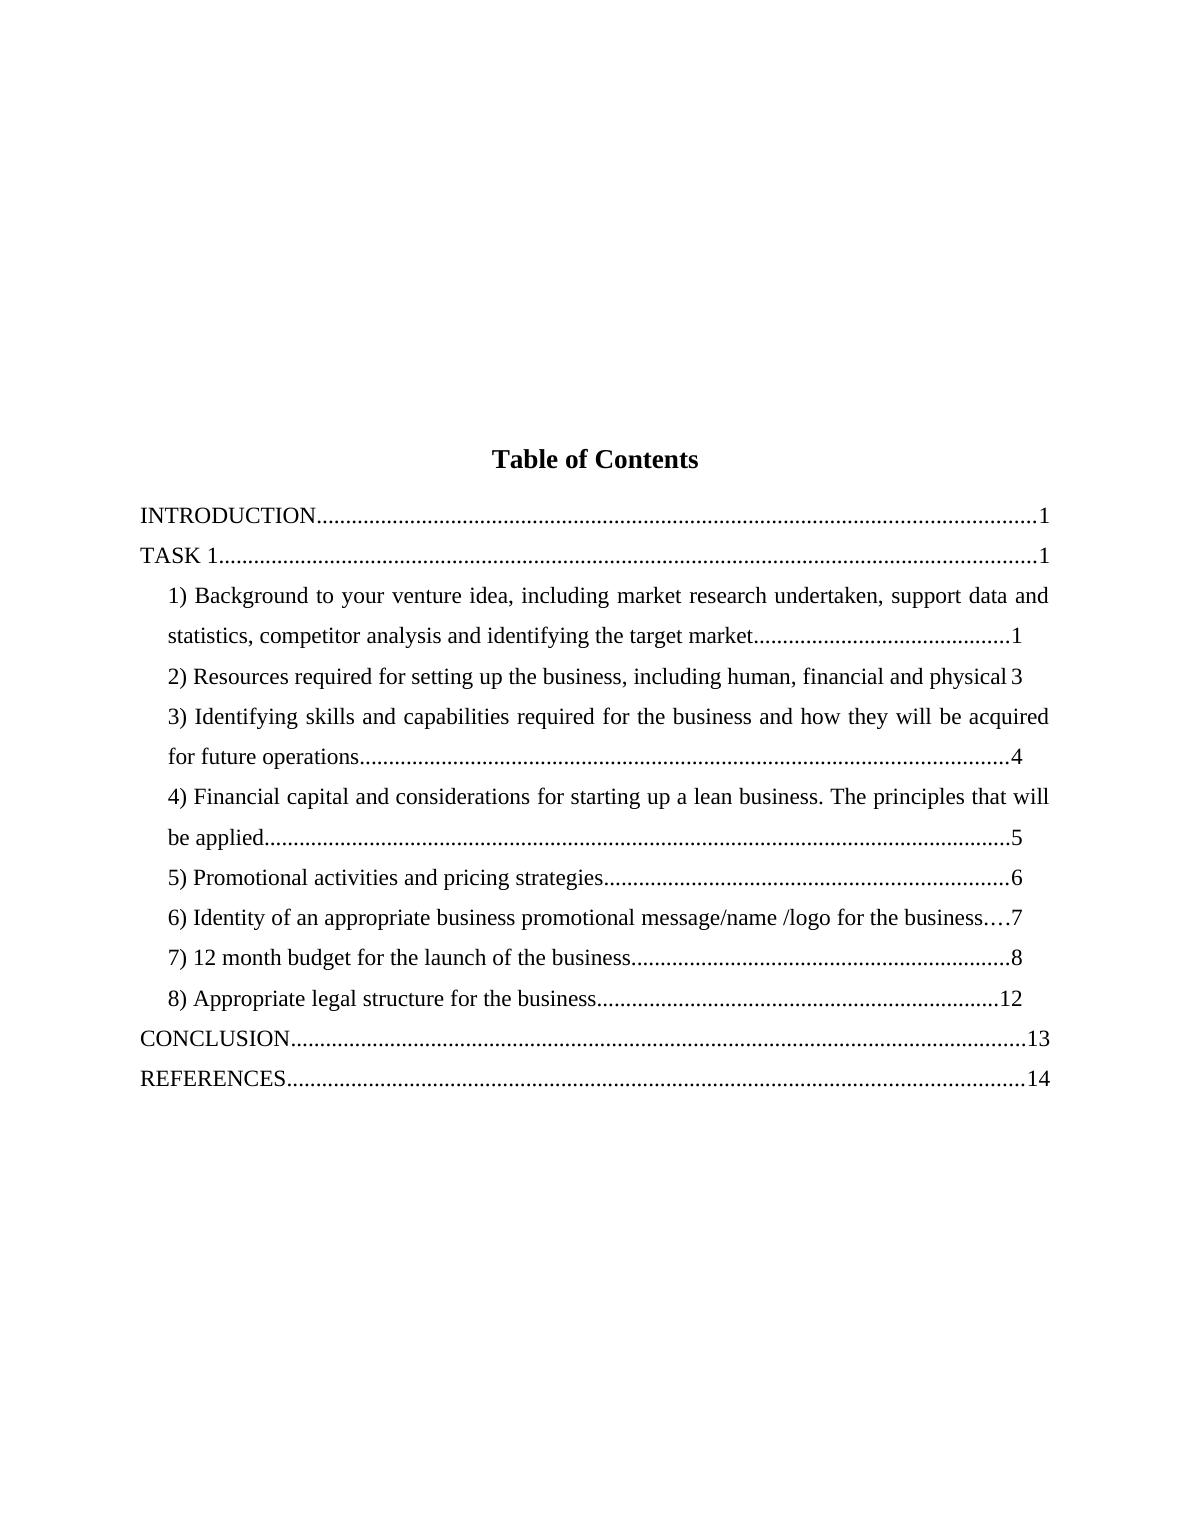 Assignment on Launching a New Venture (pdf)_2